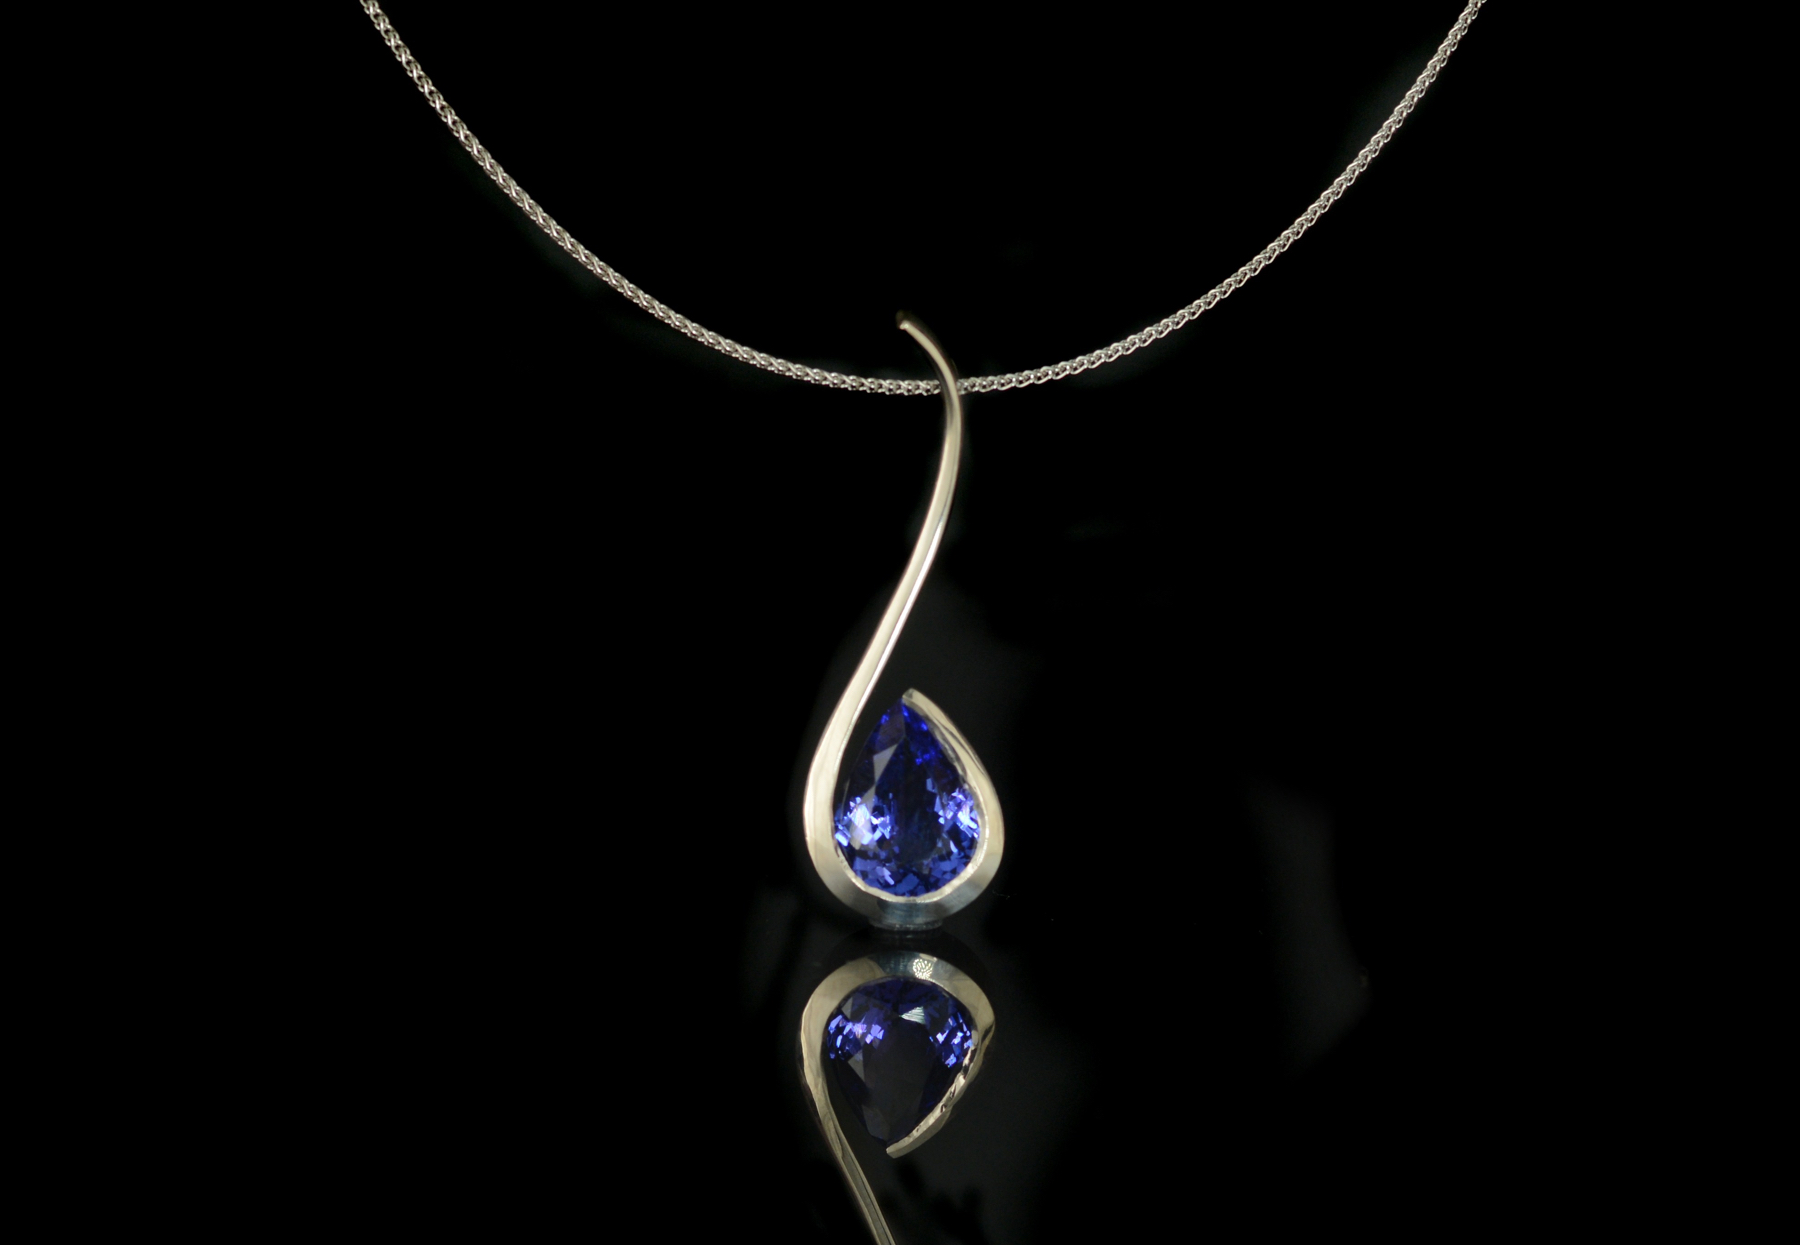 Forged white gold pendant with pear tanzanite